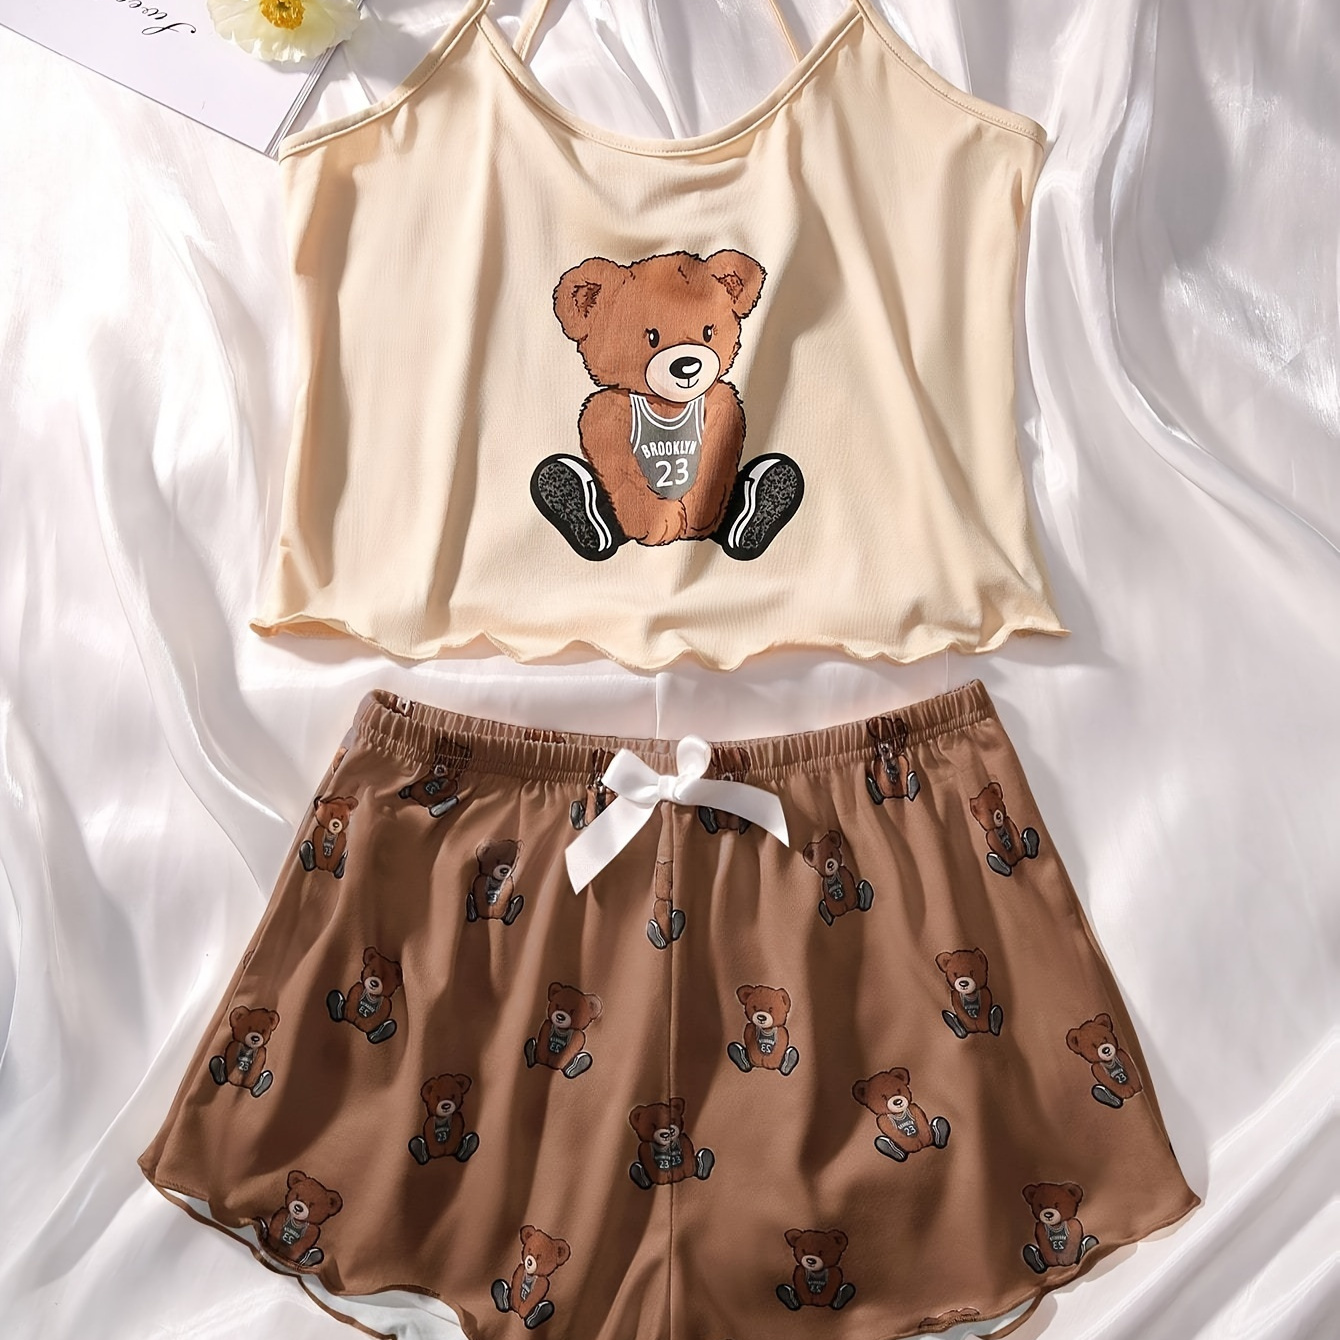 

Women's Cute Bear Print Frill Trim Pajama Set, Round Neck Backless Crop Cami Top & Shorts, Comfortable Relaxed Fit, Summer Nightwear